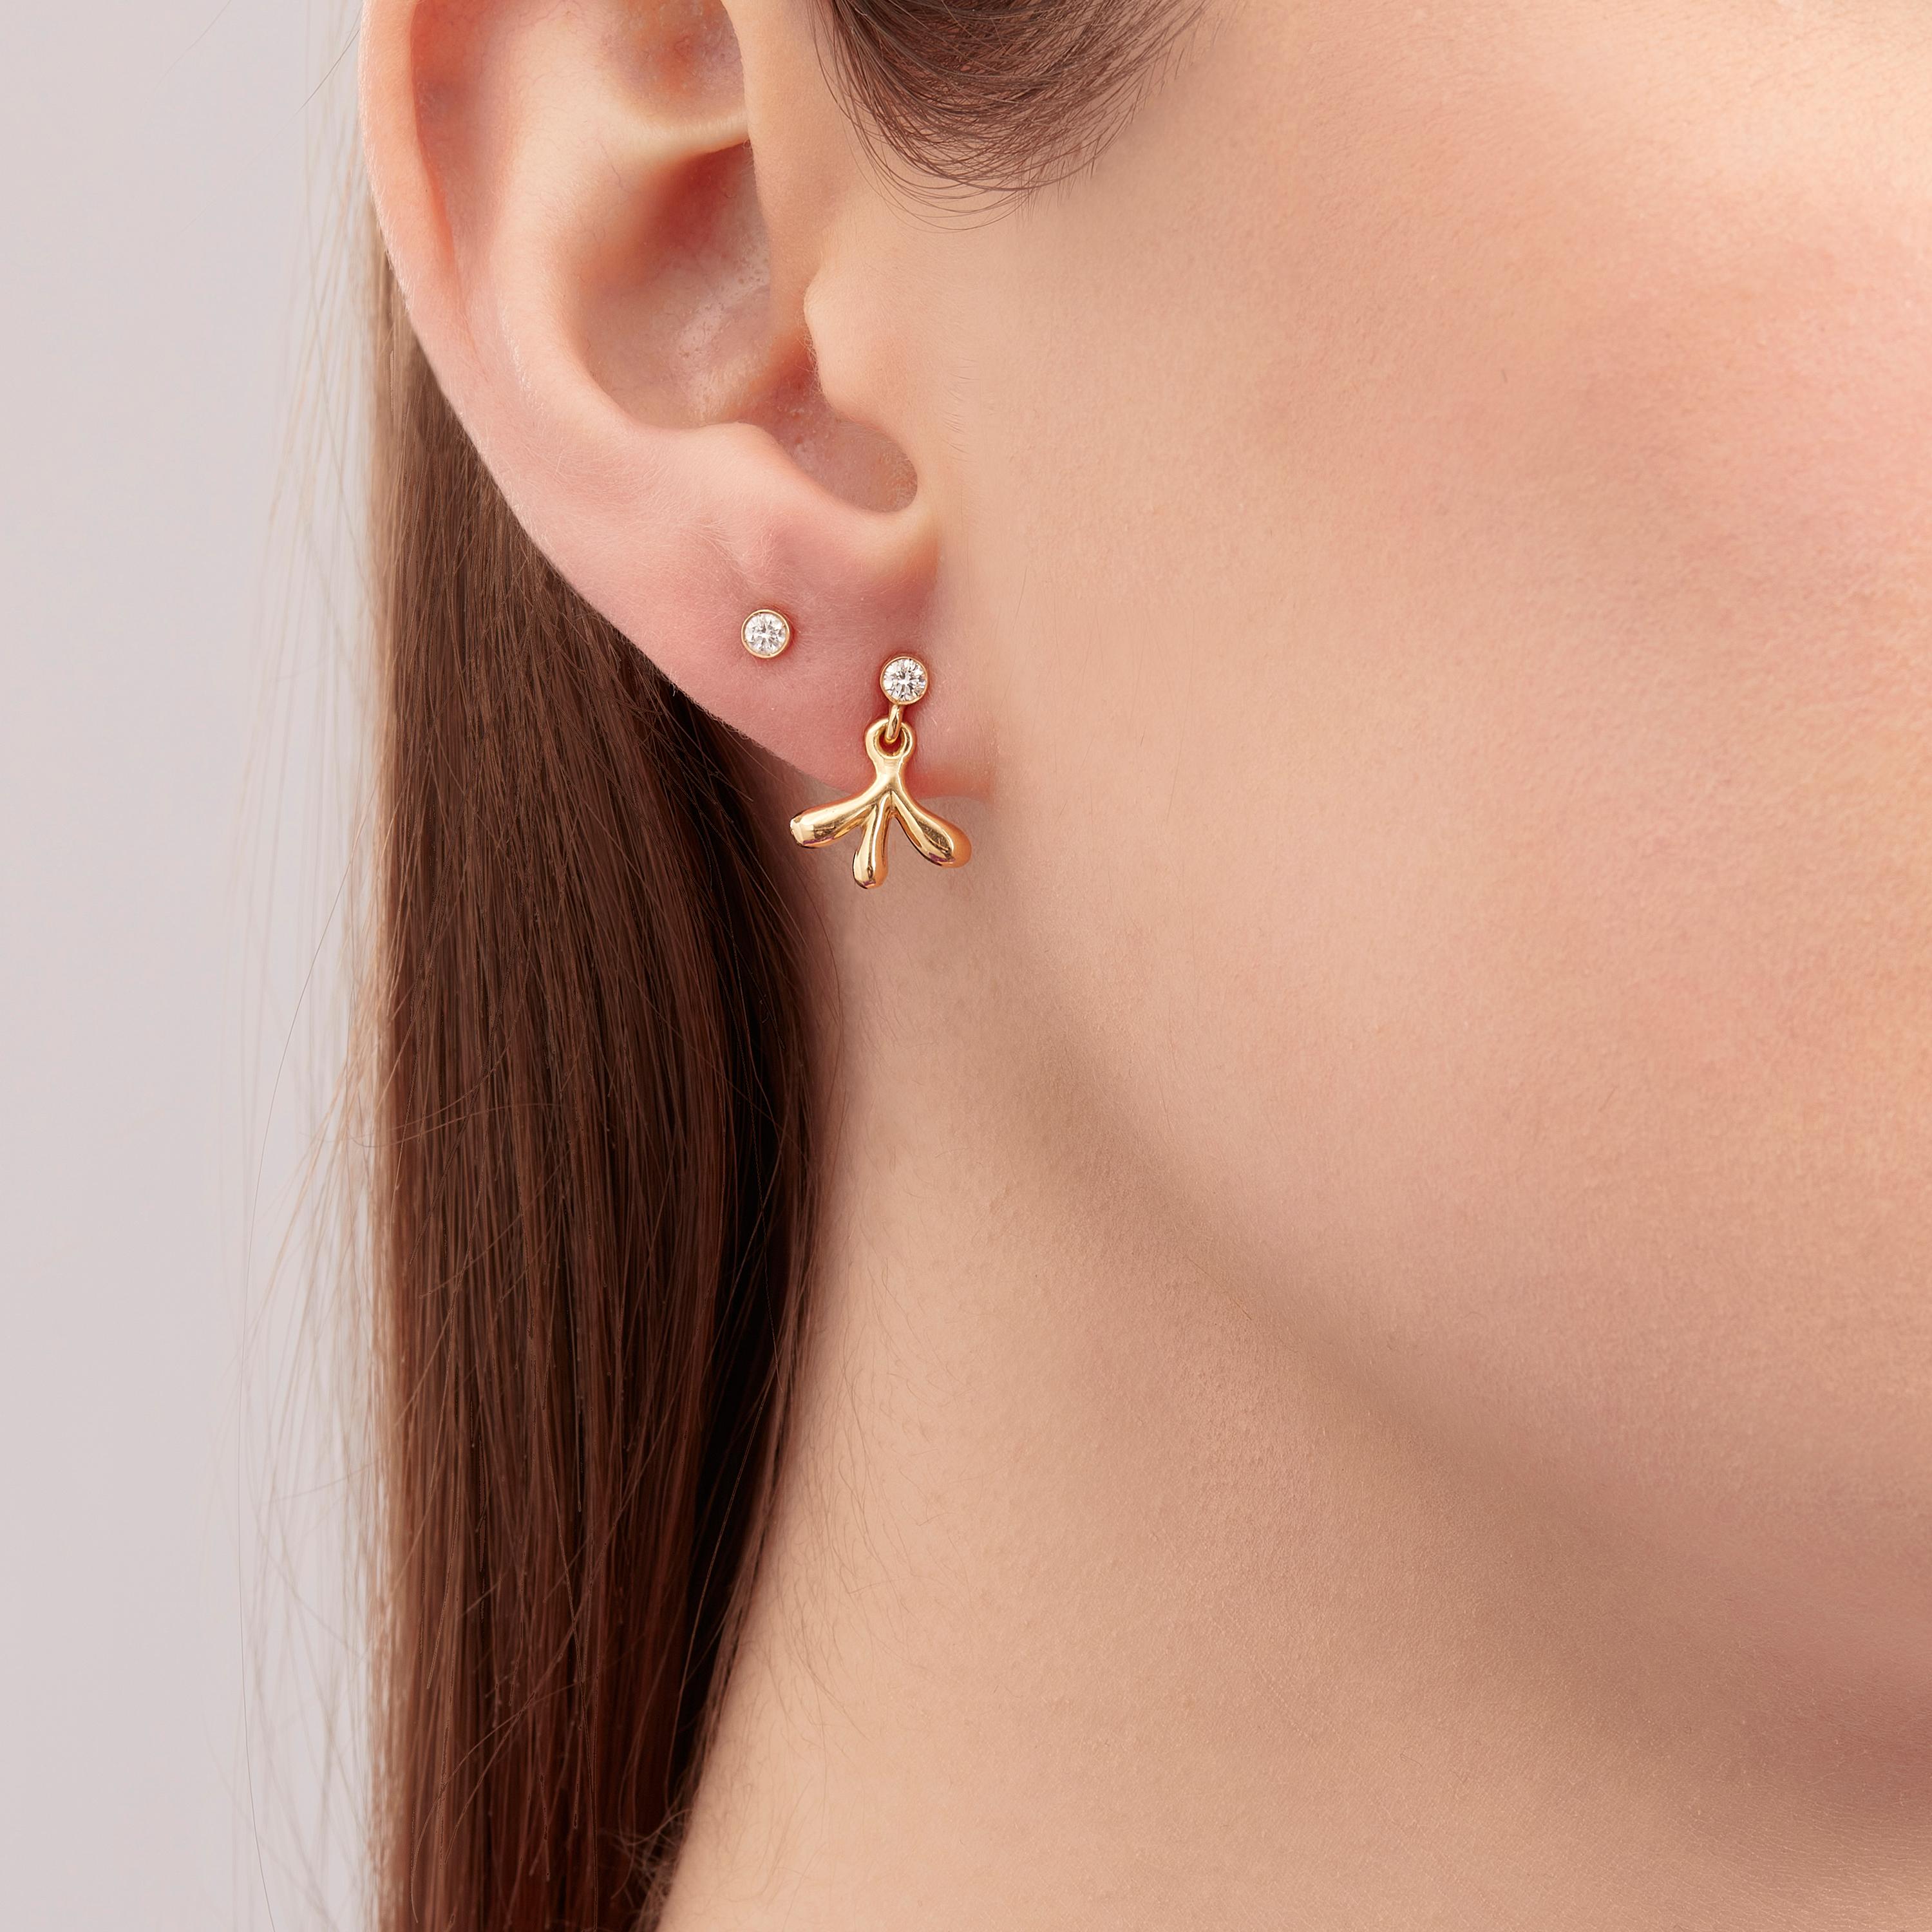 Springing forth from a lush magical wilderness are the JungleRemix Earrings Diam with their clusters of gold leaves with well-rounded tips jingling and jangling to mimic the swaying movements of exotic flora in the heart of the rainforest. Cast as